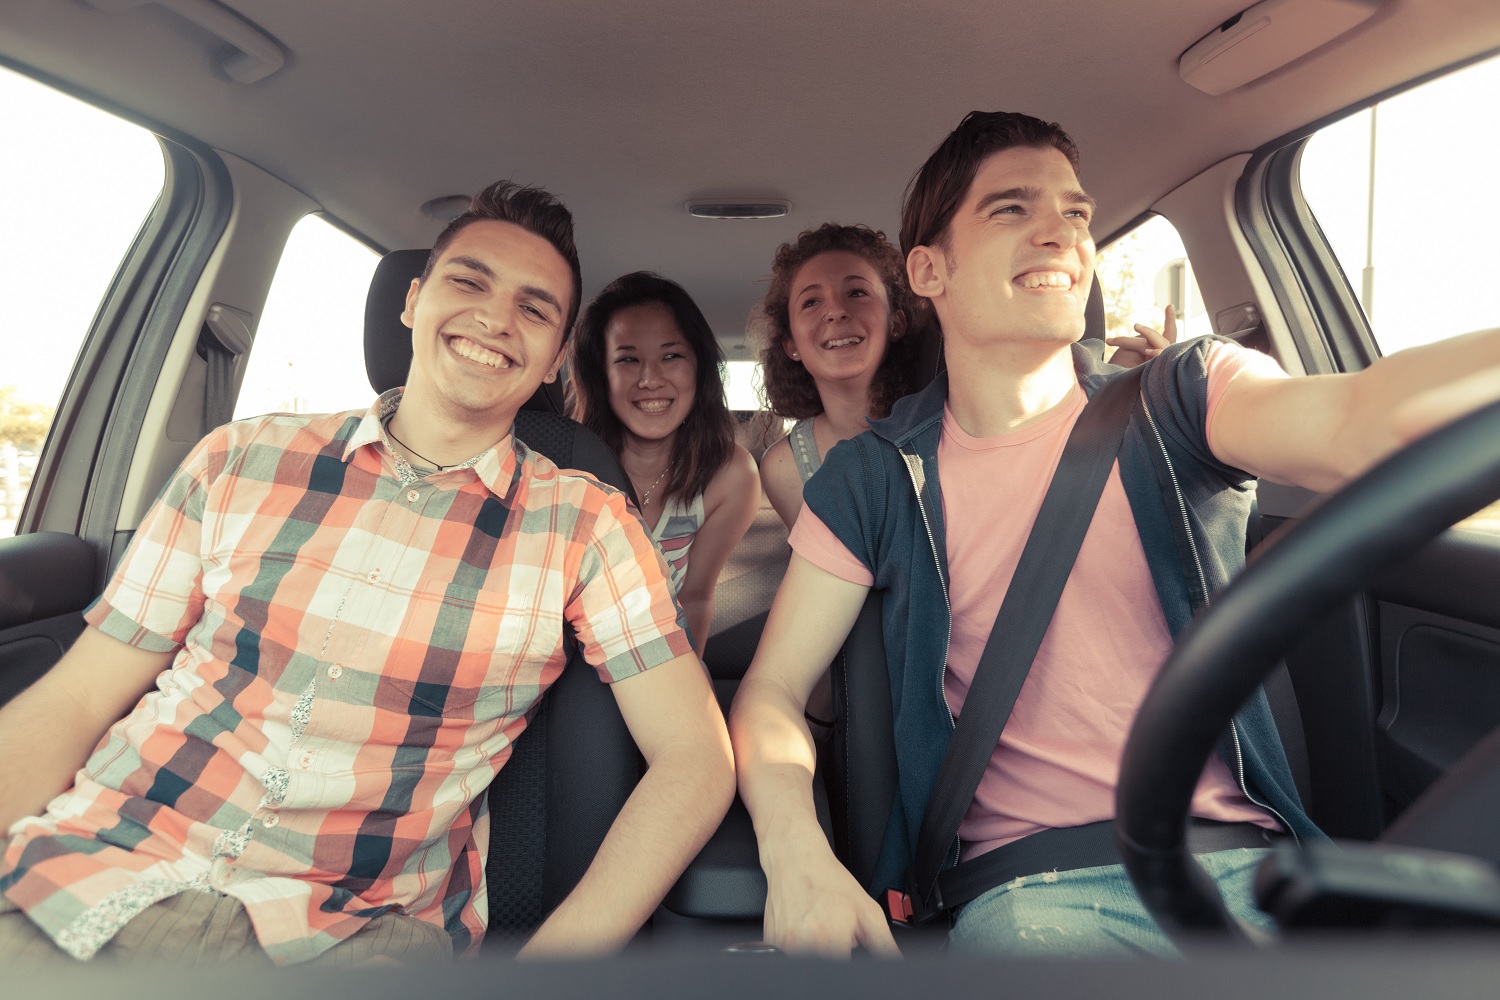 The majority of fatal teen car accidents occur six months after a teen obtains his or her driver's license. Teenagers are more likely to engage in speedy driving behaviors, and also more likely than any other group to be involved in alcohol-related accidents